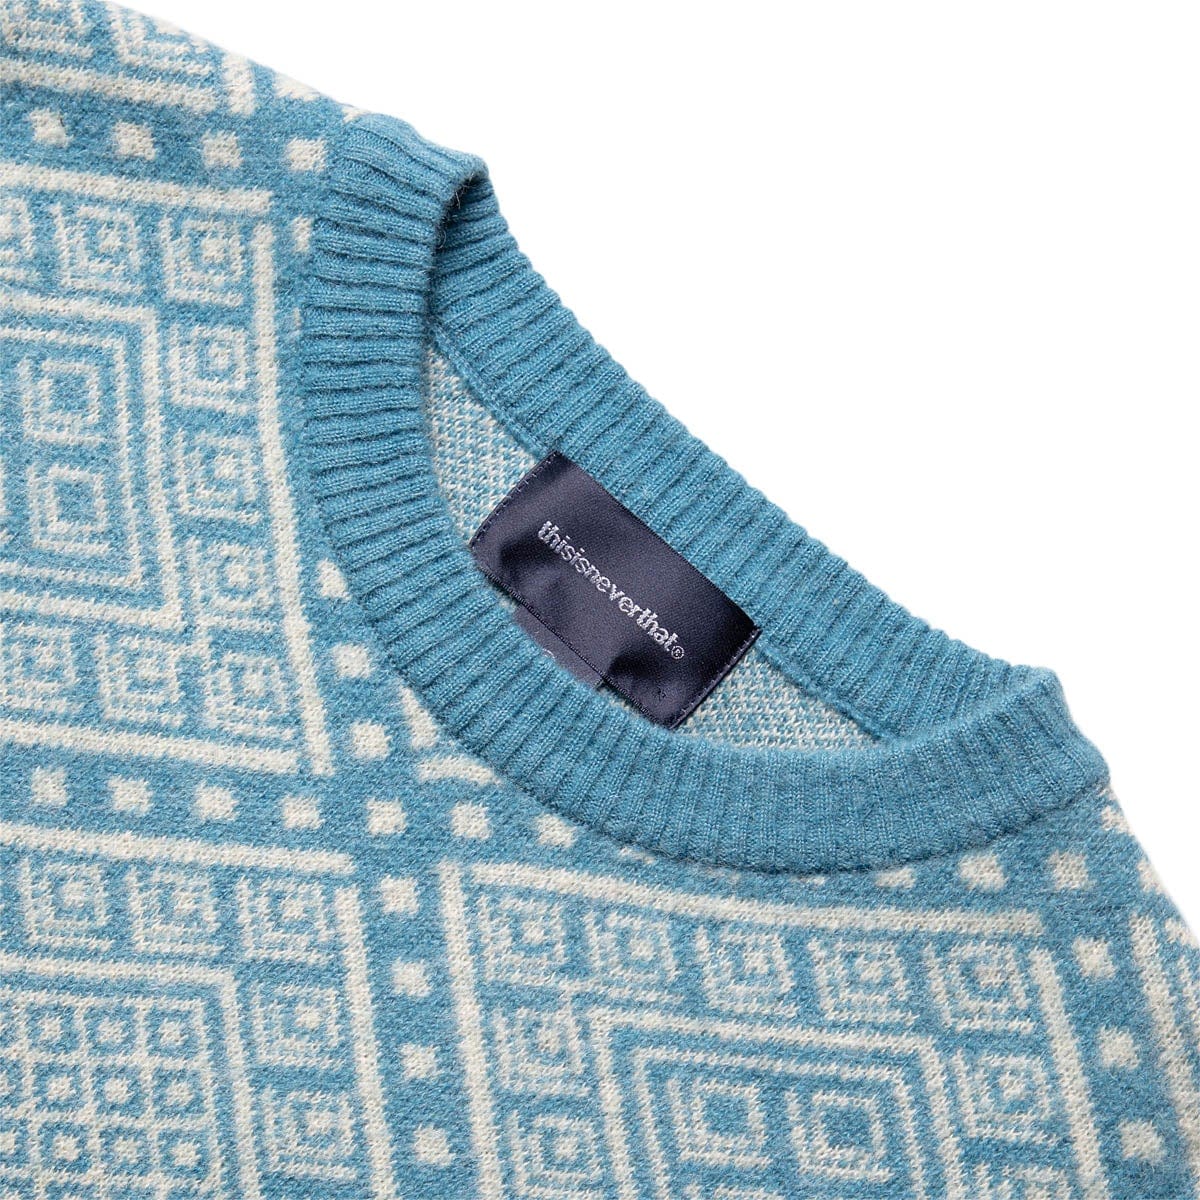 this Knitwear MOROCCAN JACQUARD SWEATER